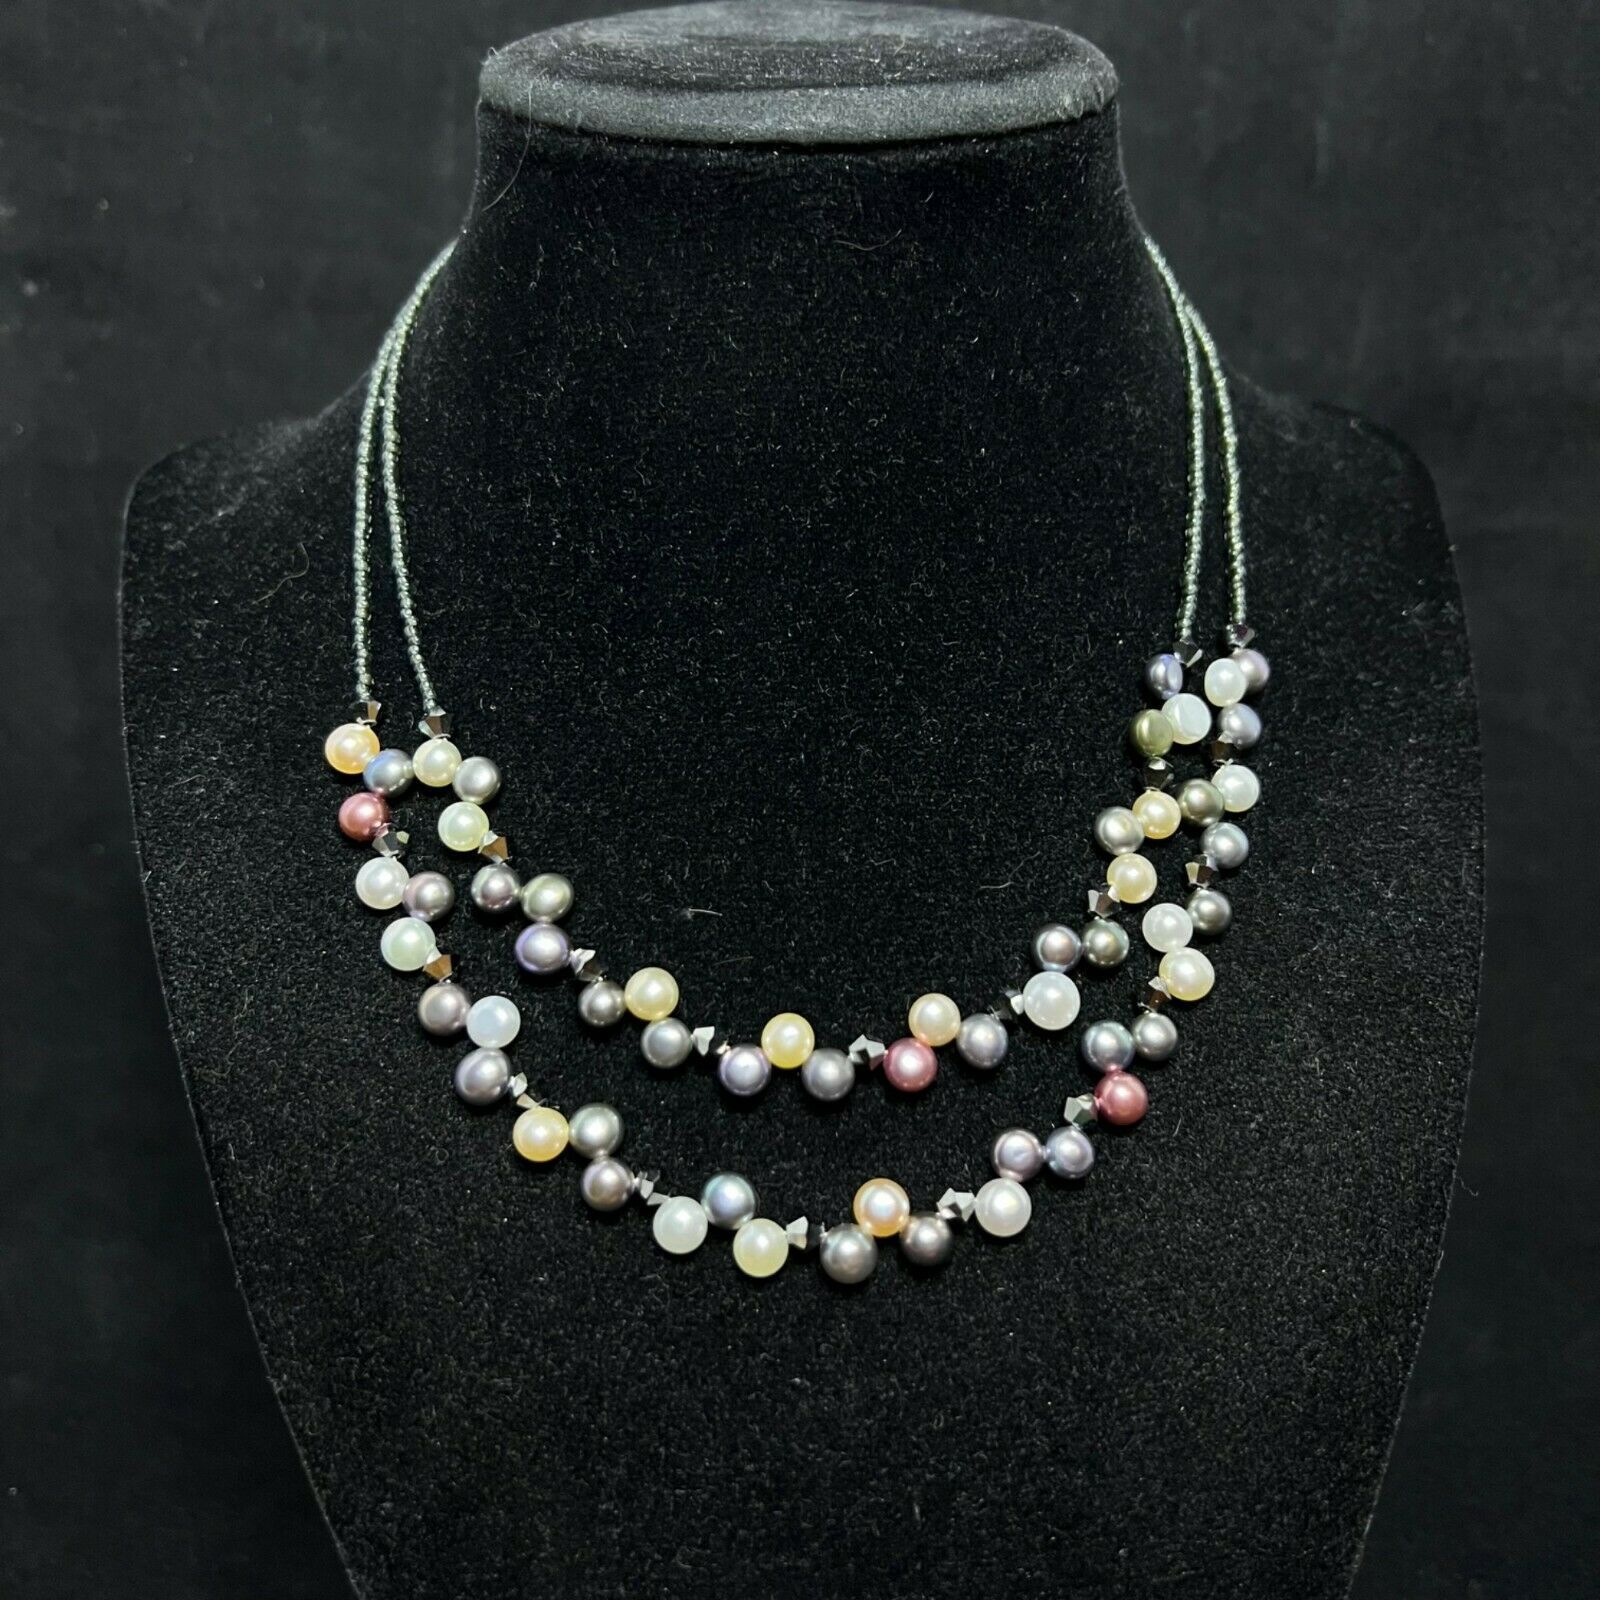 Vintage Silver Tone Lia Sophia Faux Pearl And Seed Bead Necklace (2570) - $20.00